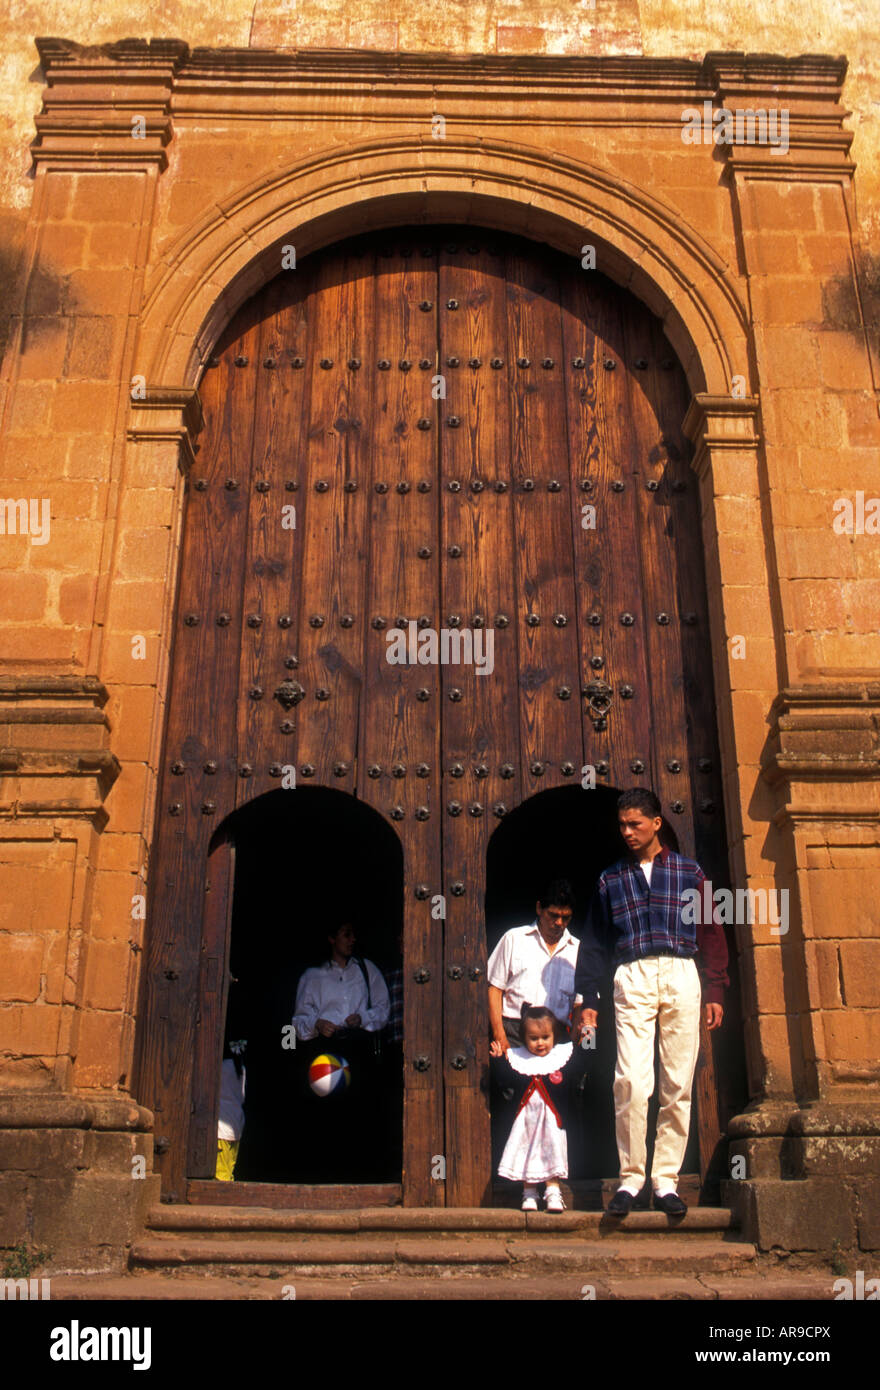 Mexicans, Mexican family, family, mother, father, daughter, tourists, visitors, La Compania Church, town of Patzcuaro, Michoacan State, Mexico Stock Photo